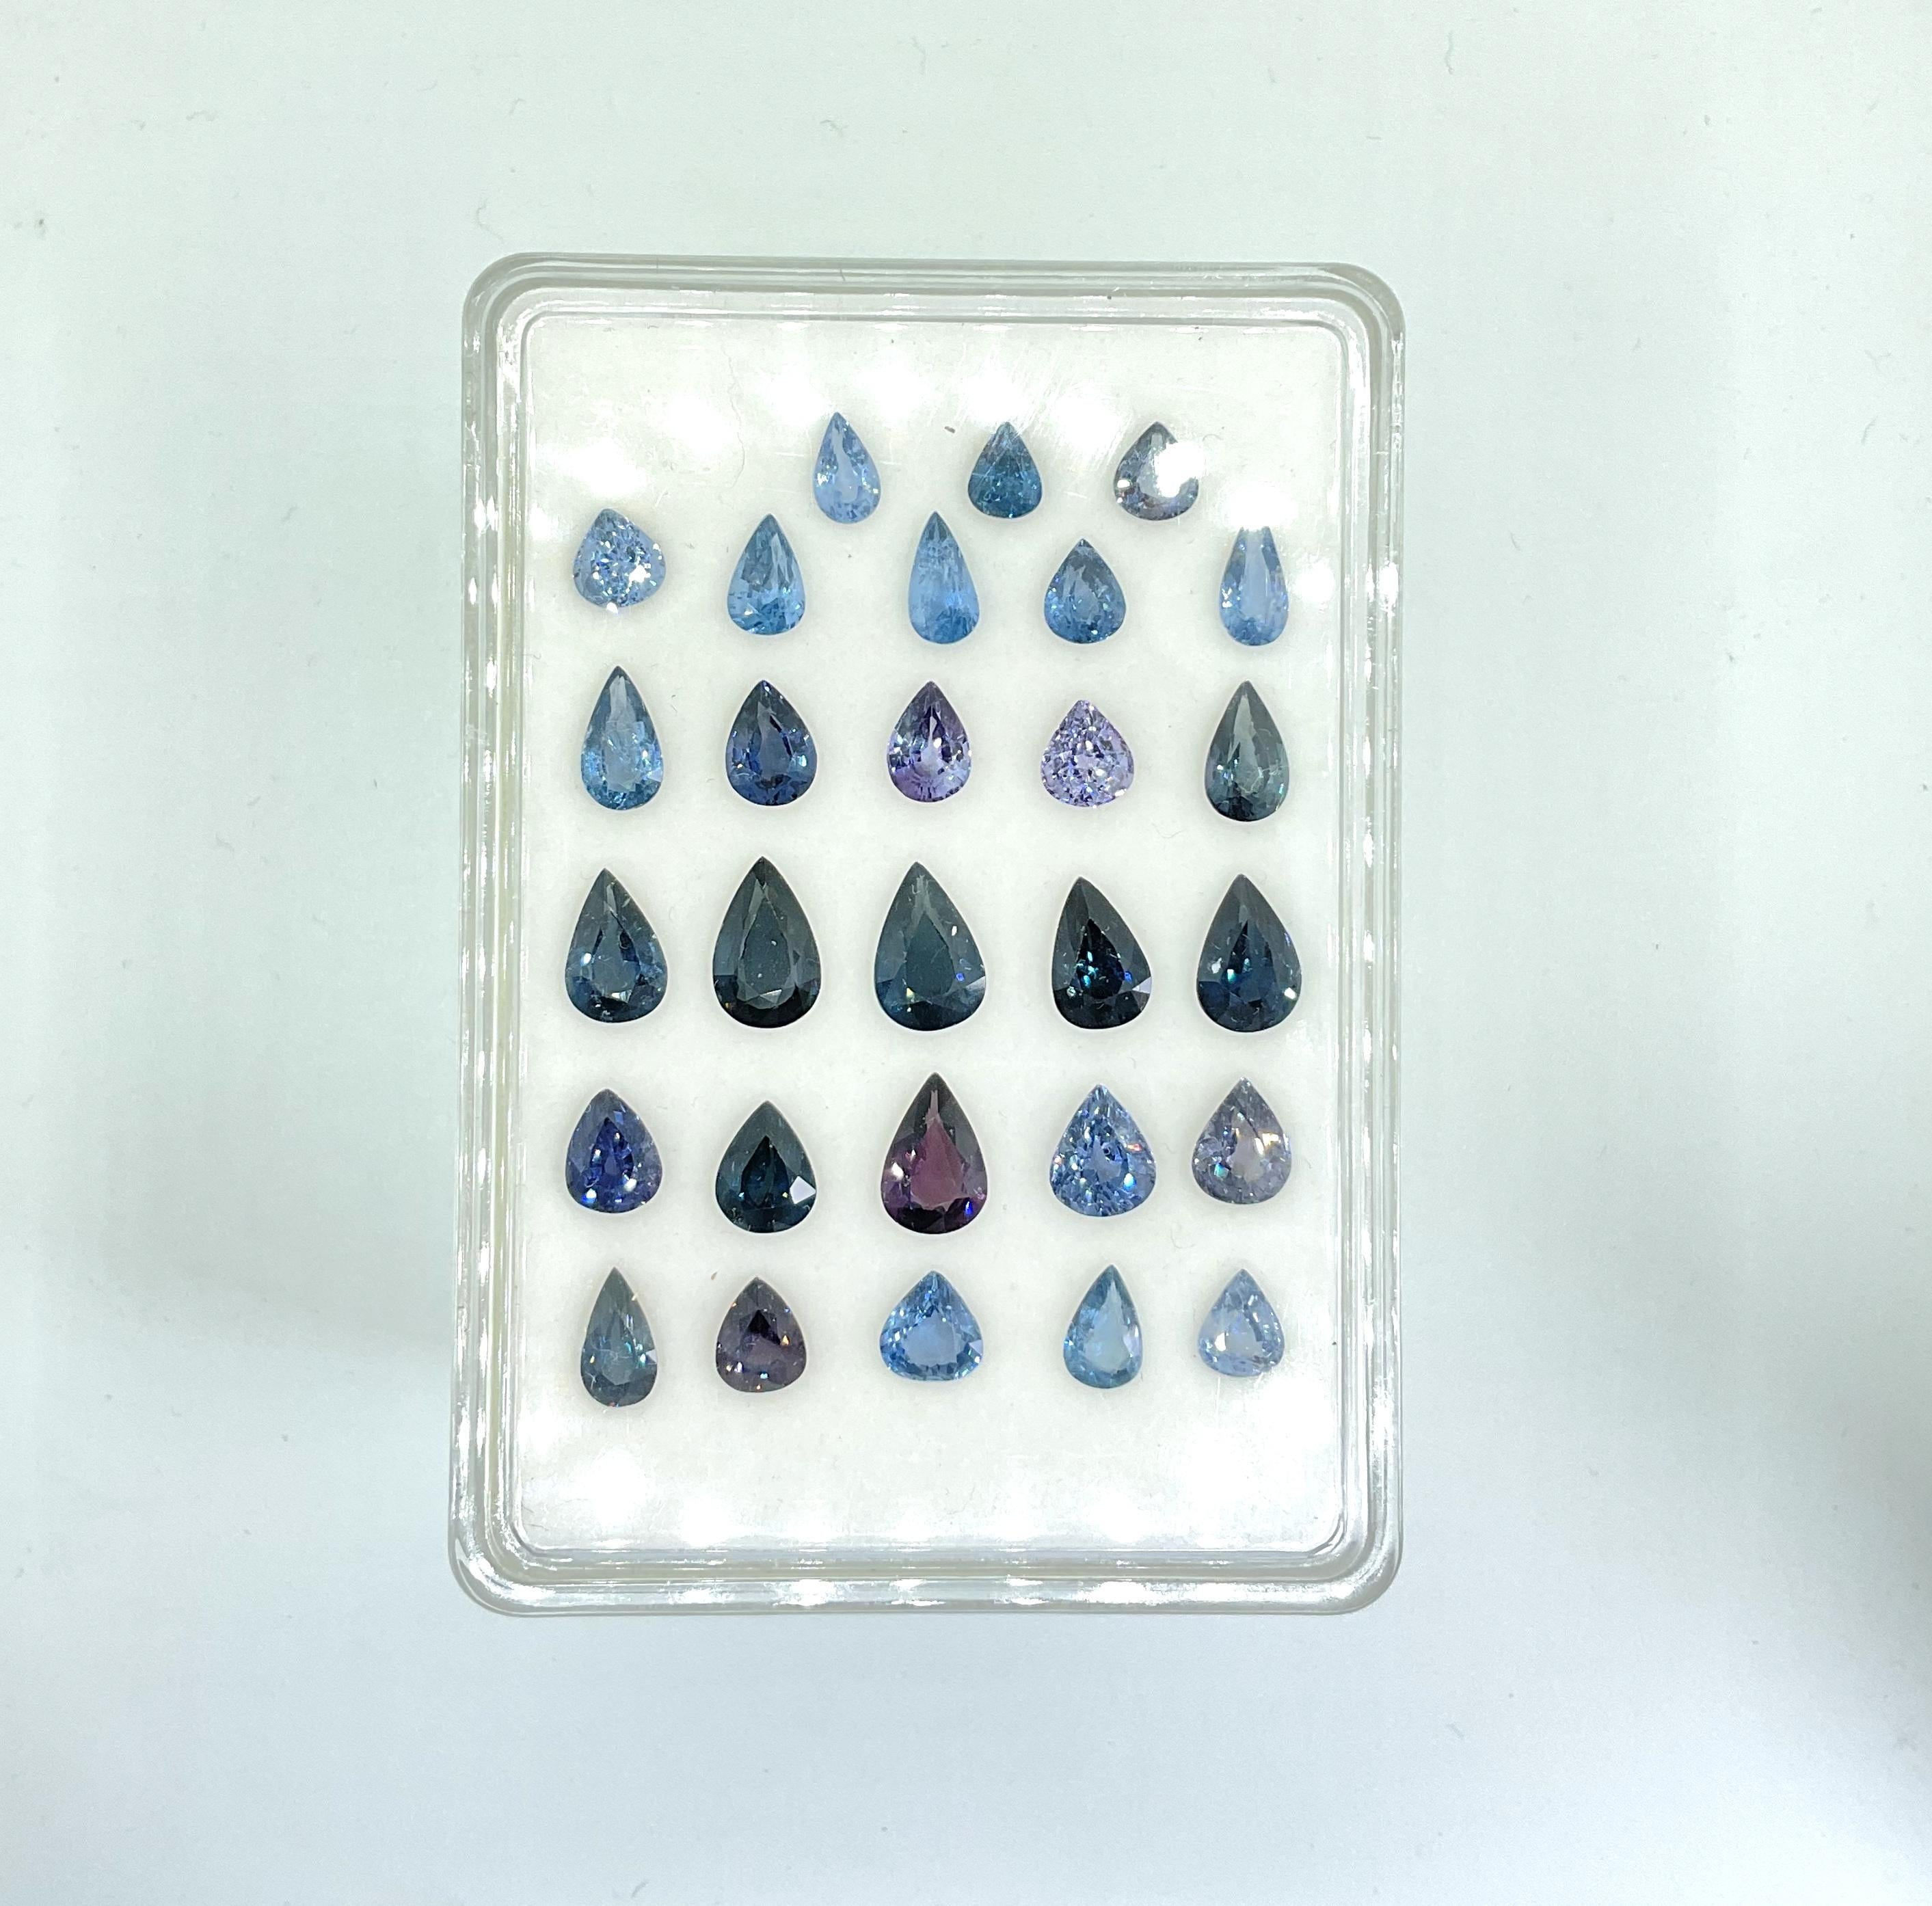 Taille poire 35.12 Carat Blue Spinel Tanzania Faceted Pear Cut stone For Jewelry Natural Gem en vente